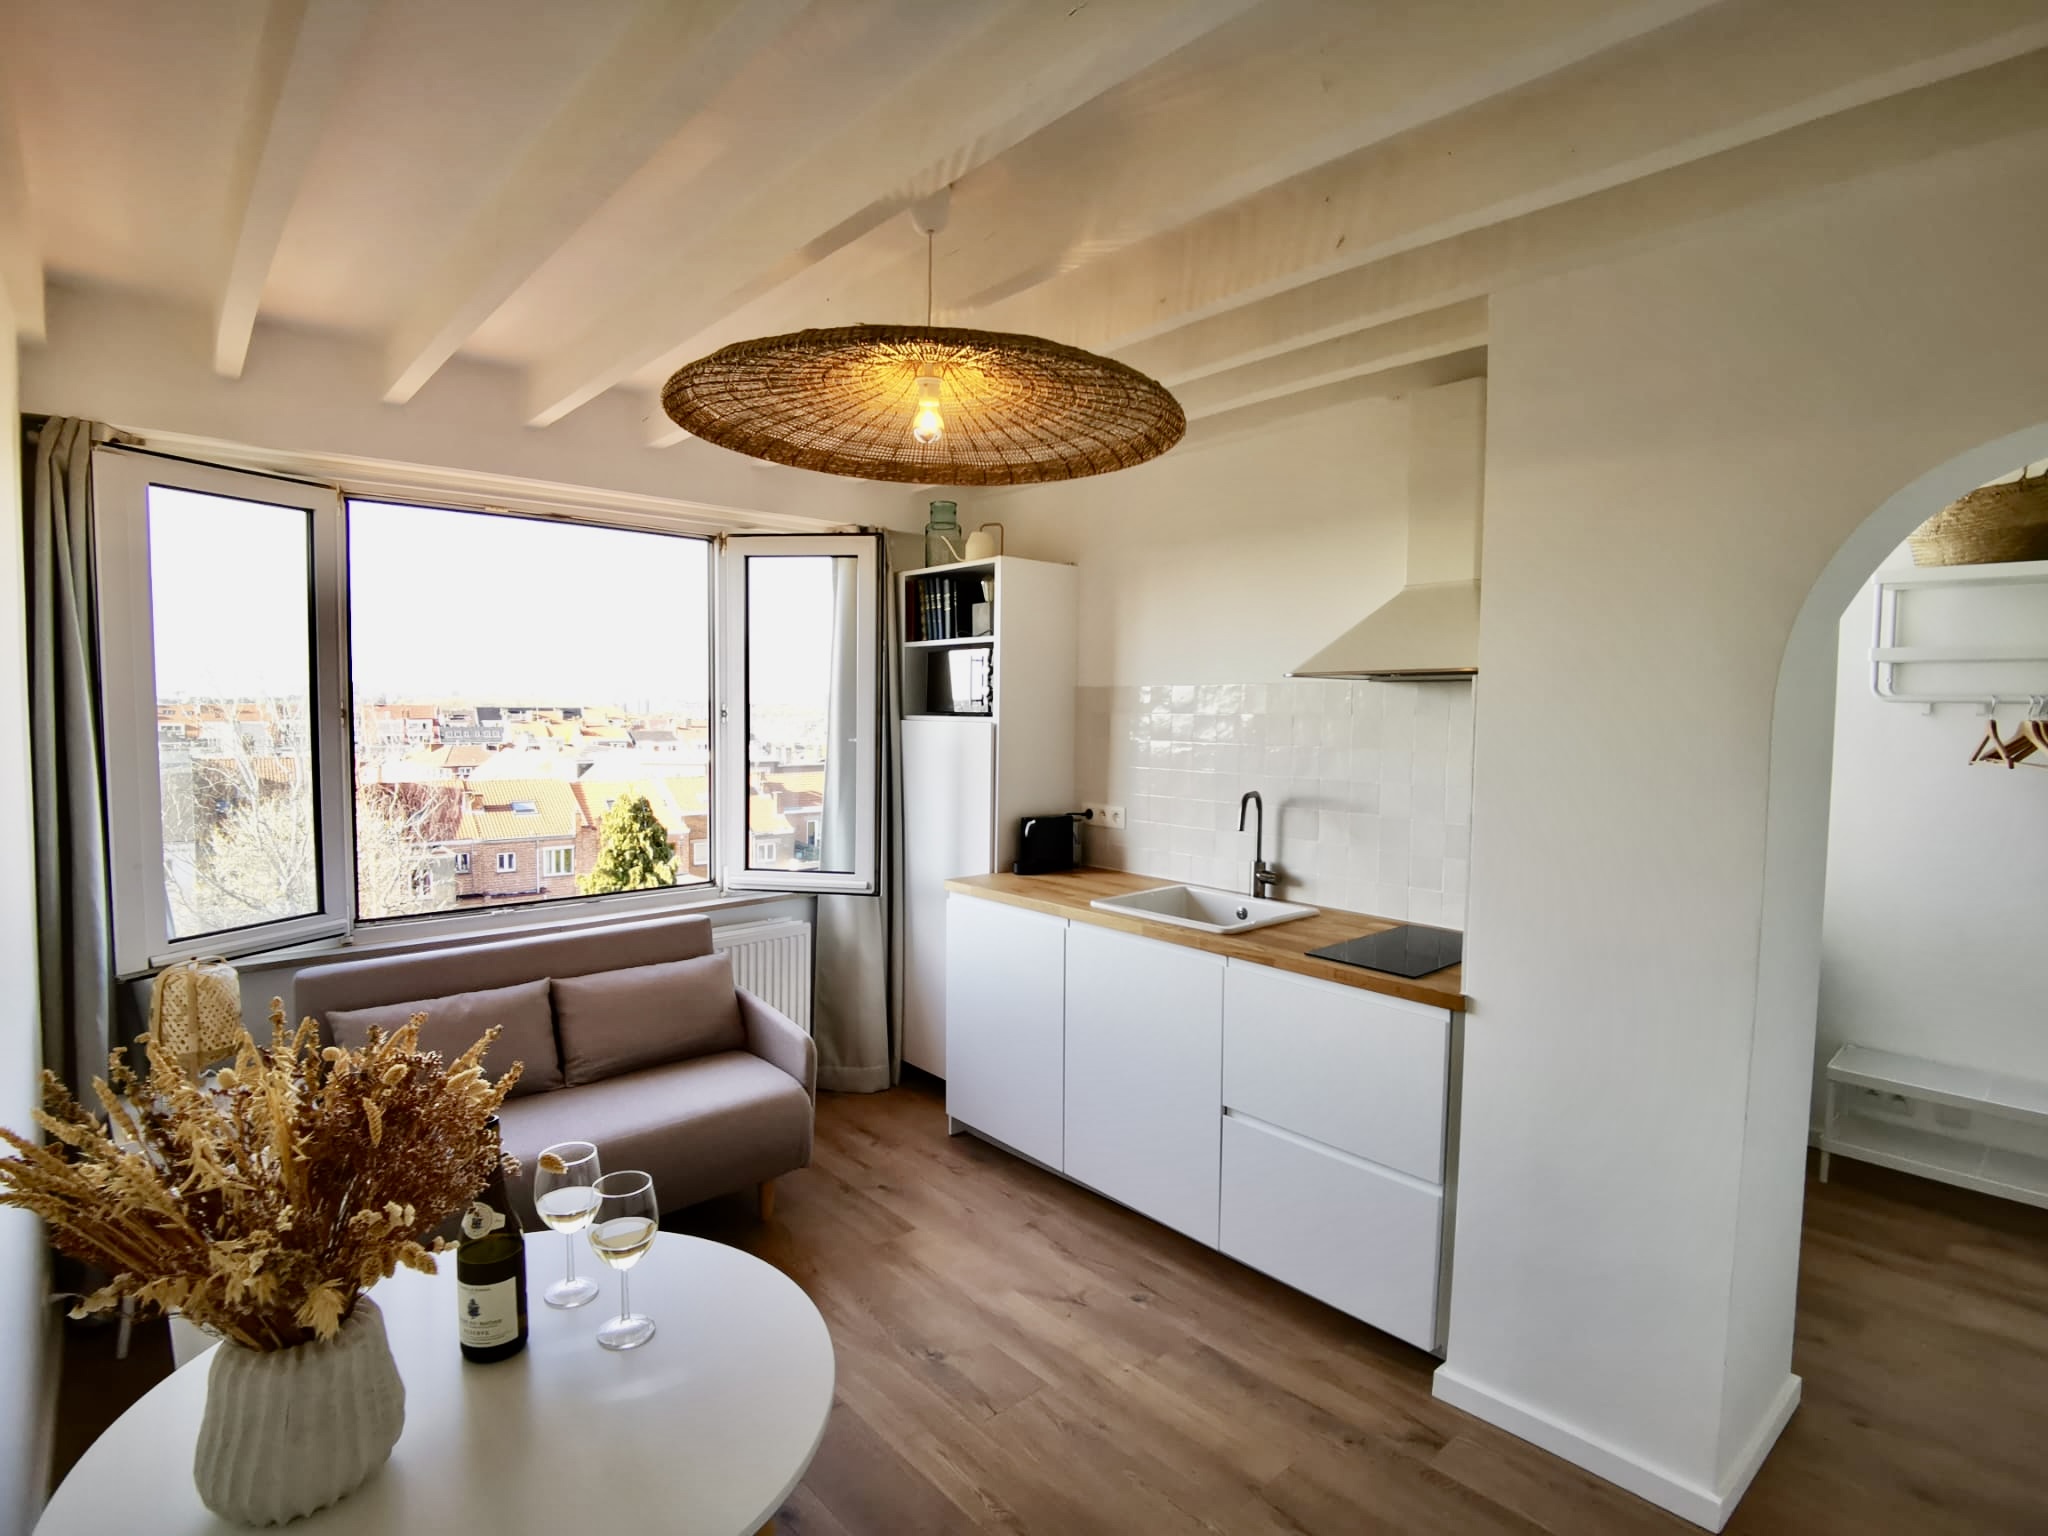 apartment for rent near brussels - kitchen